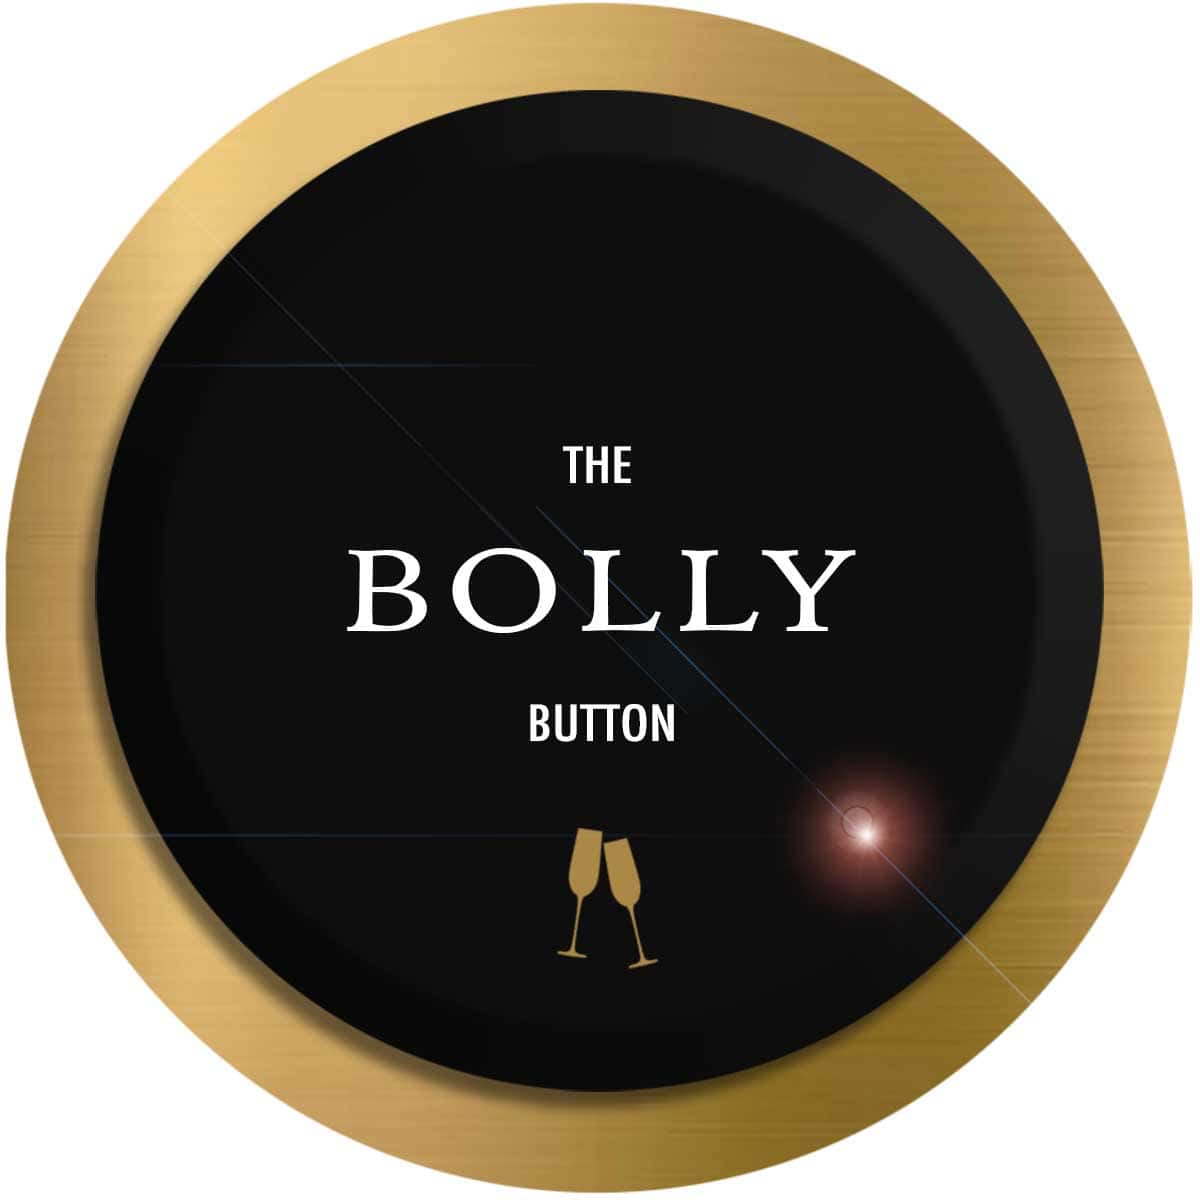 Champagne ordering call button - The Bolly Button